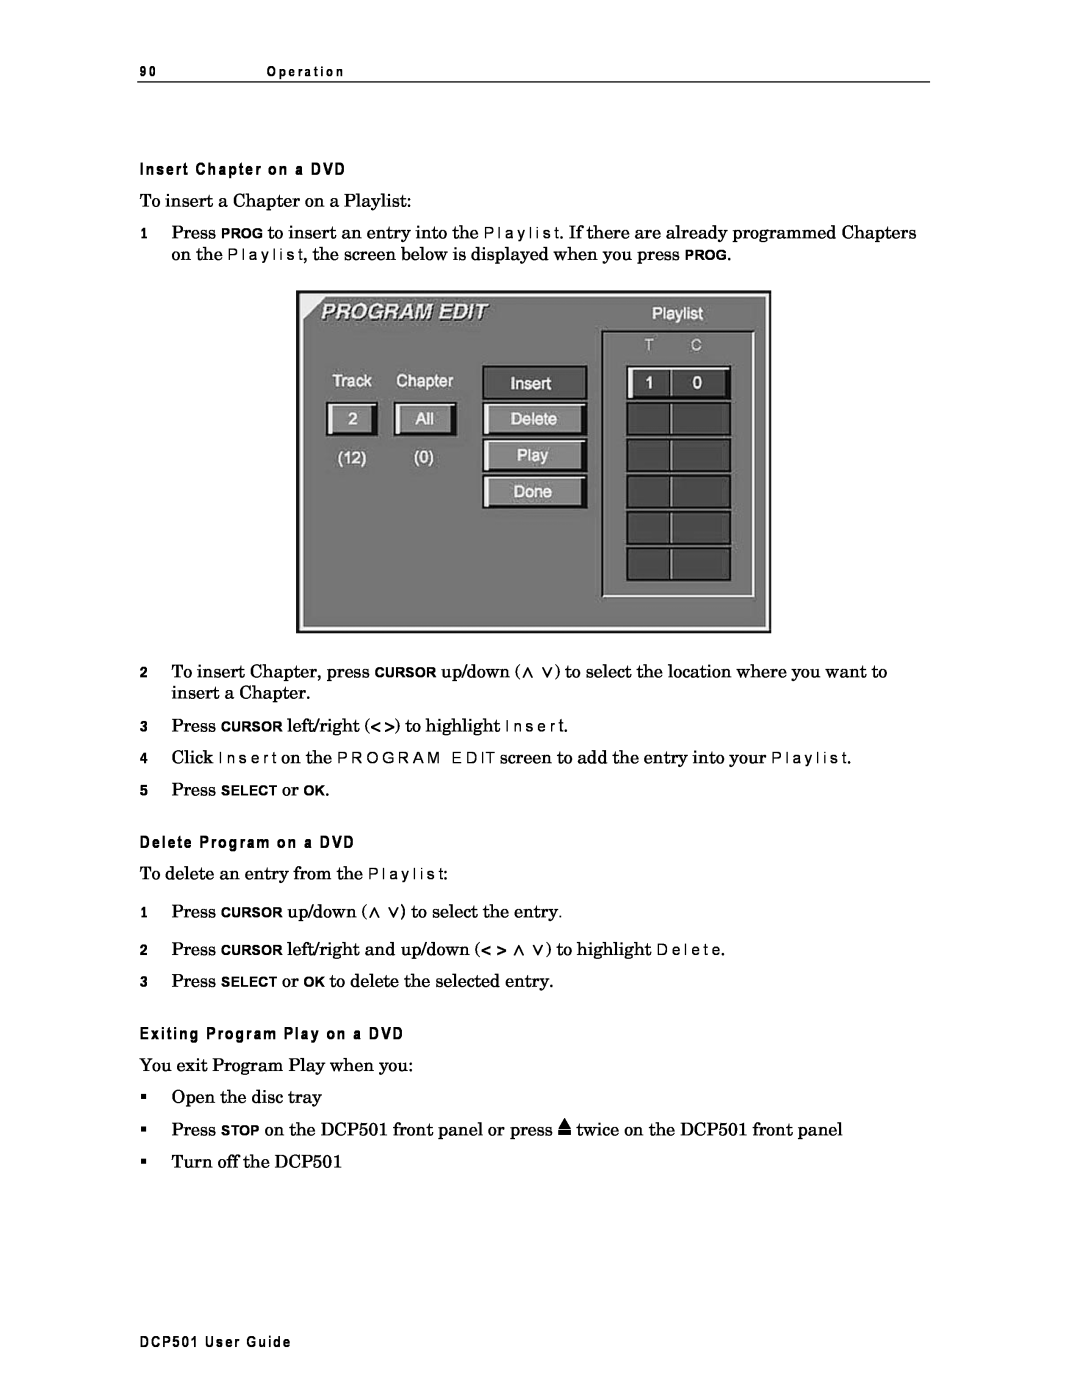 Motorola DCP501 manual Insert Chapter on a DVD, Delete Program on a DVD, Exiting Program Play on a DVD 